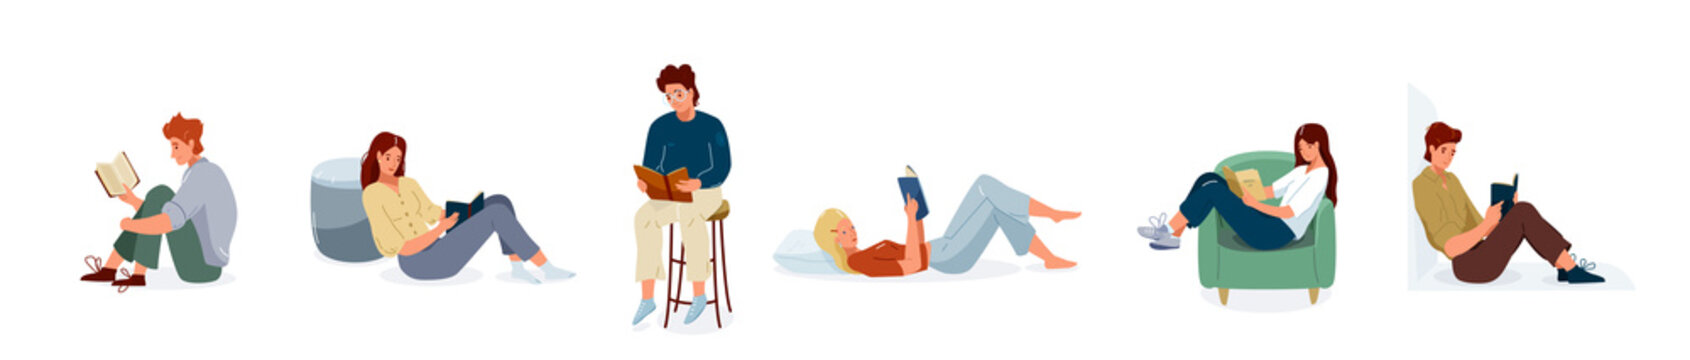 Read book vector illustration. Set of people reading books in different comfortable pose. Student girls and boys study knowledge. Collection of readers, style flat literature with person